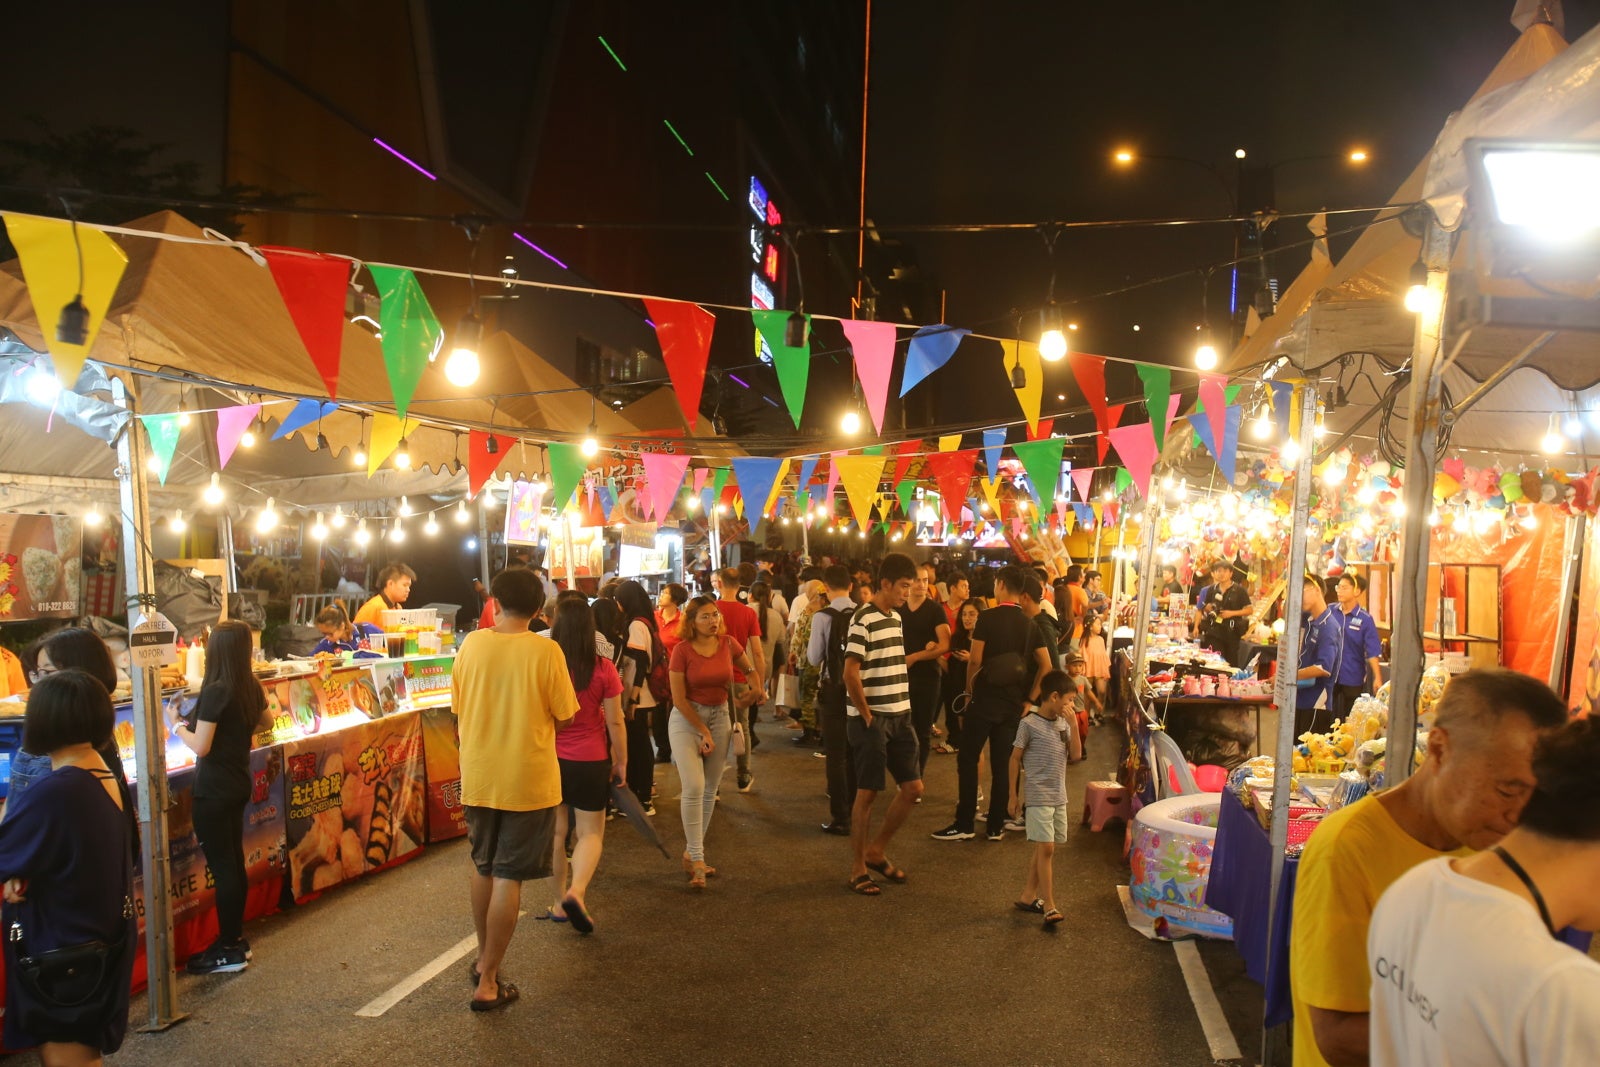 [Test] Celebrity Concerts, Over 70 Delicious Street Foods & More! You NEED to Check Out This Mall on NYE - WORLD OF BUZZ 2